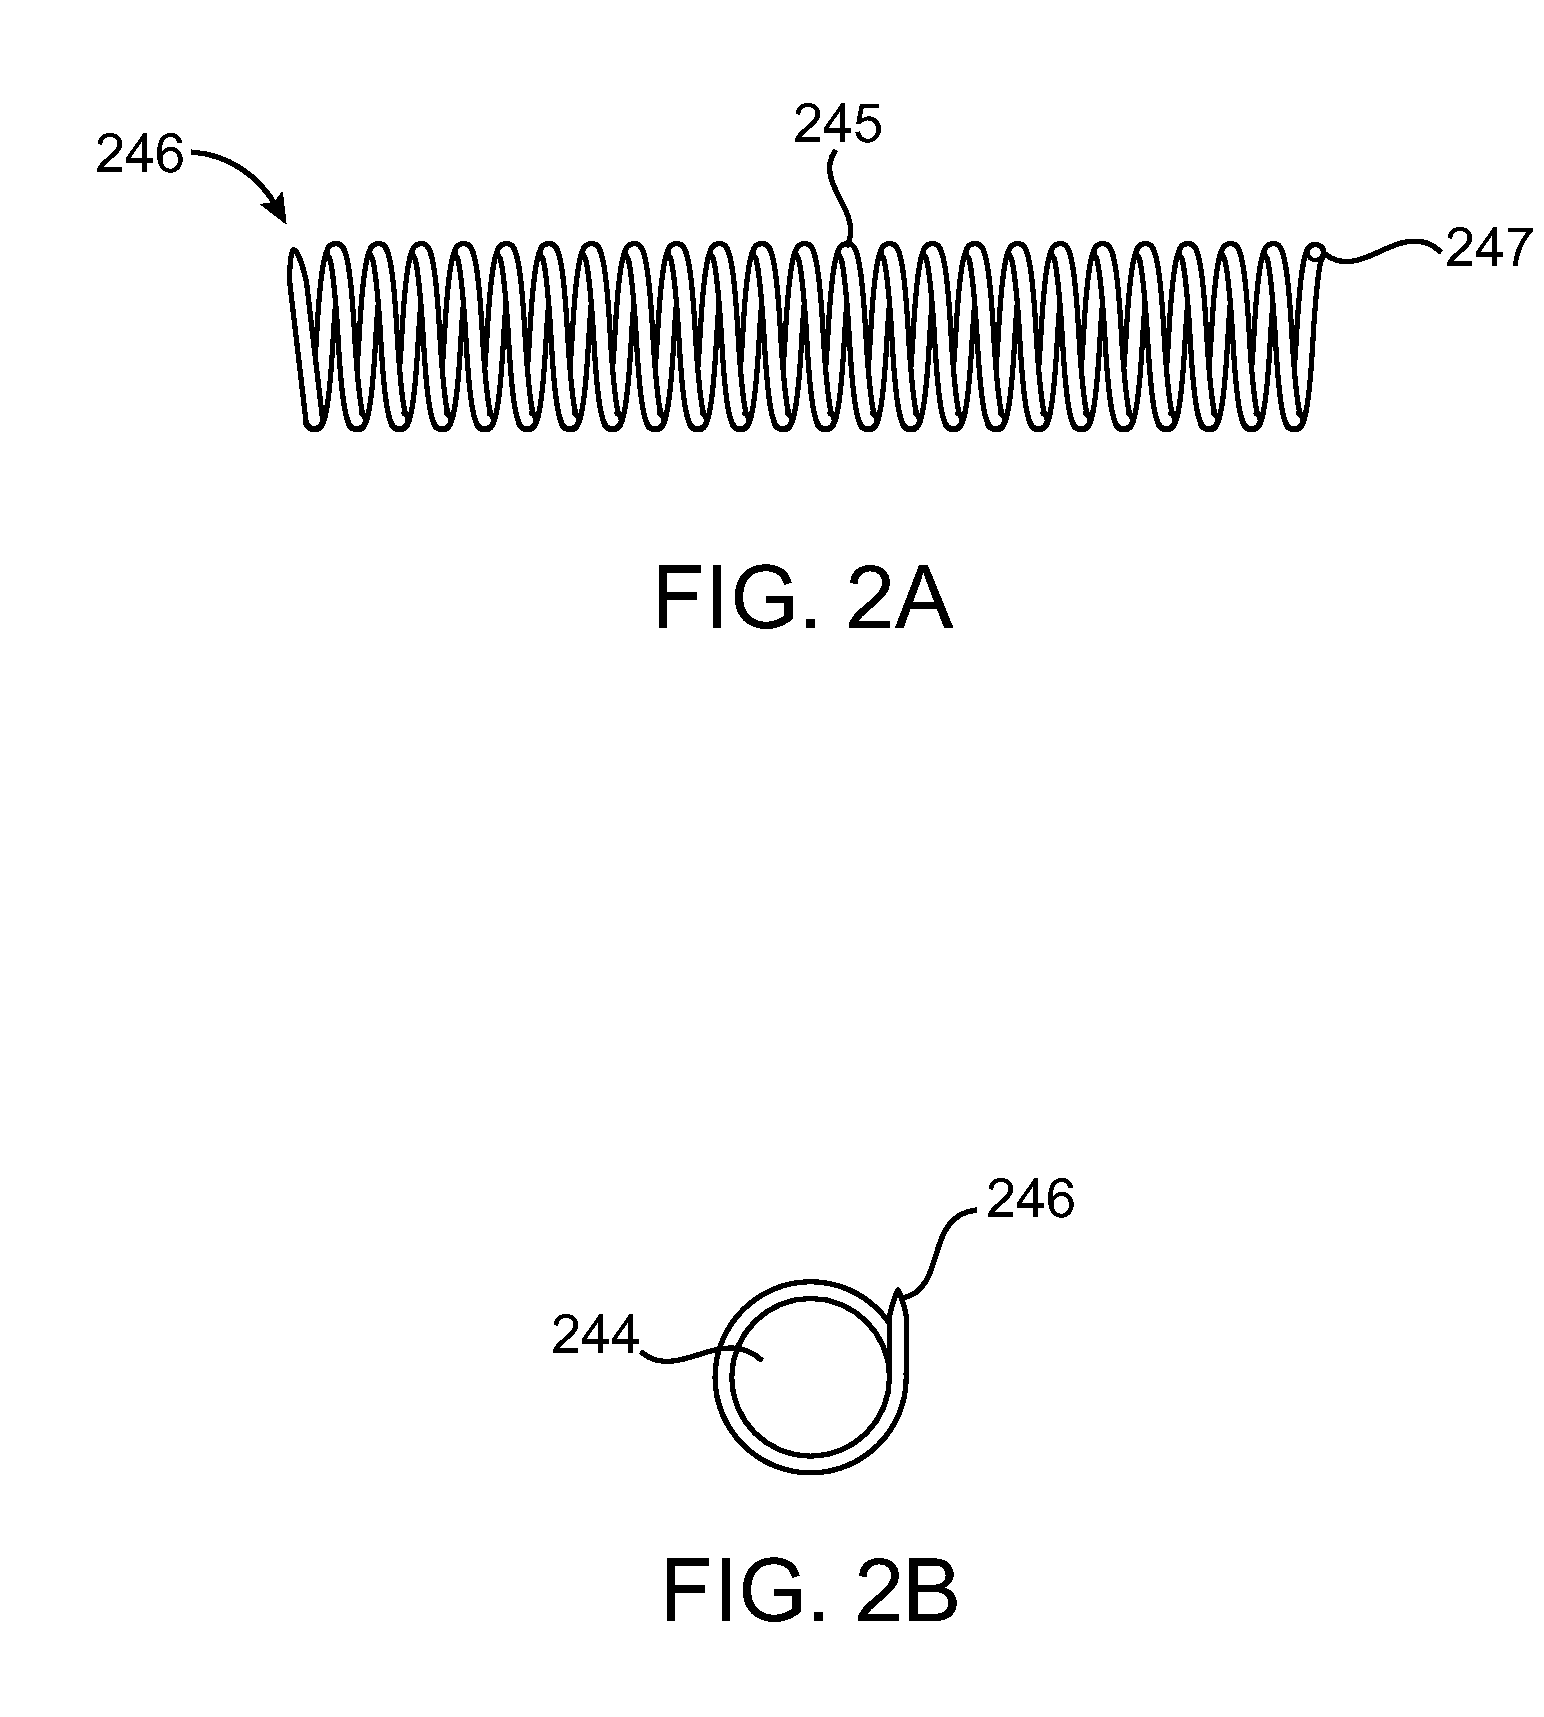 Annuloplasty Device Having a Helical Anchor and Methods for its Use